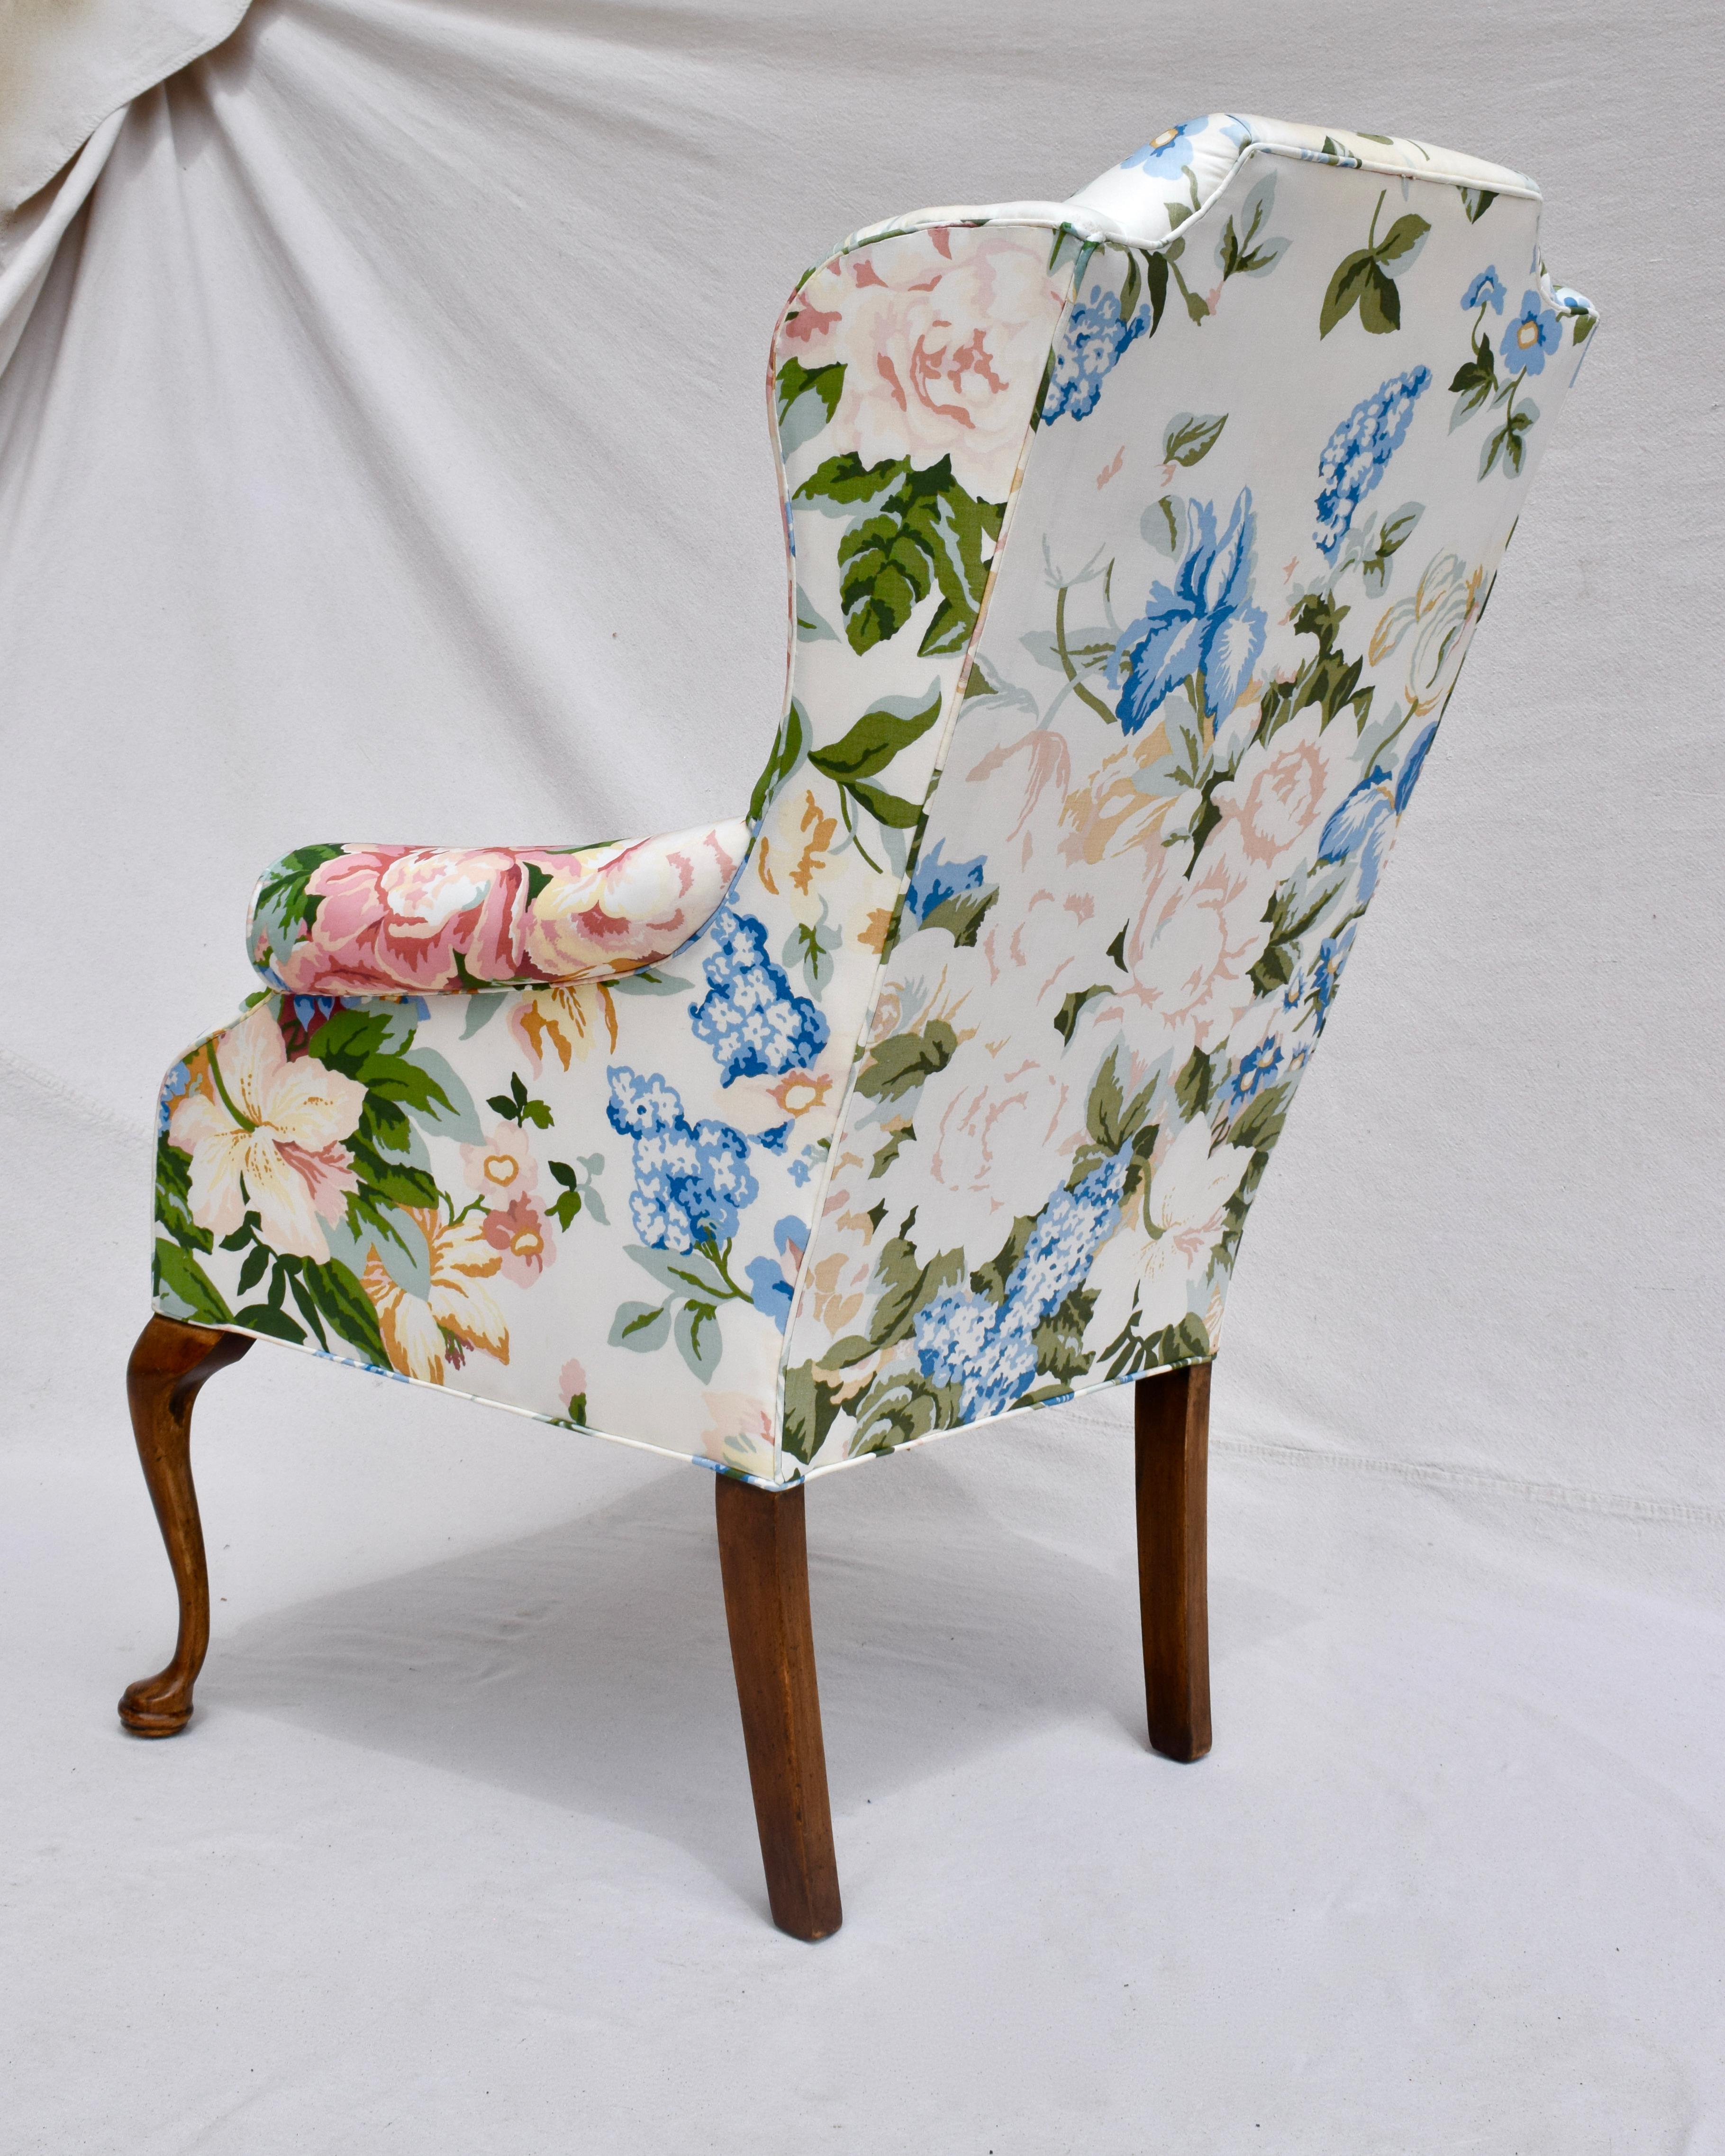 Queen Anne Small Scale Lee Industries Chintz Floral Wingback Chair